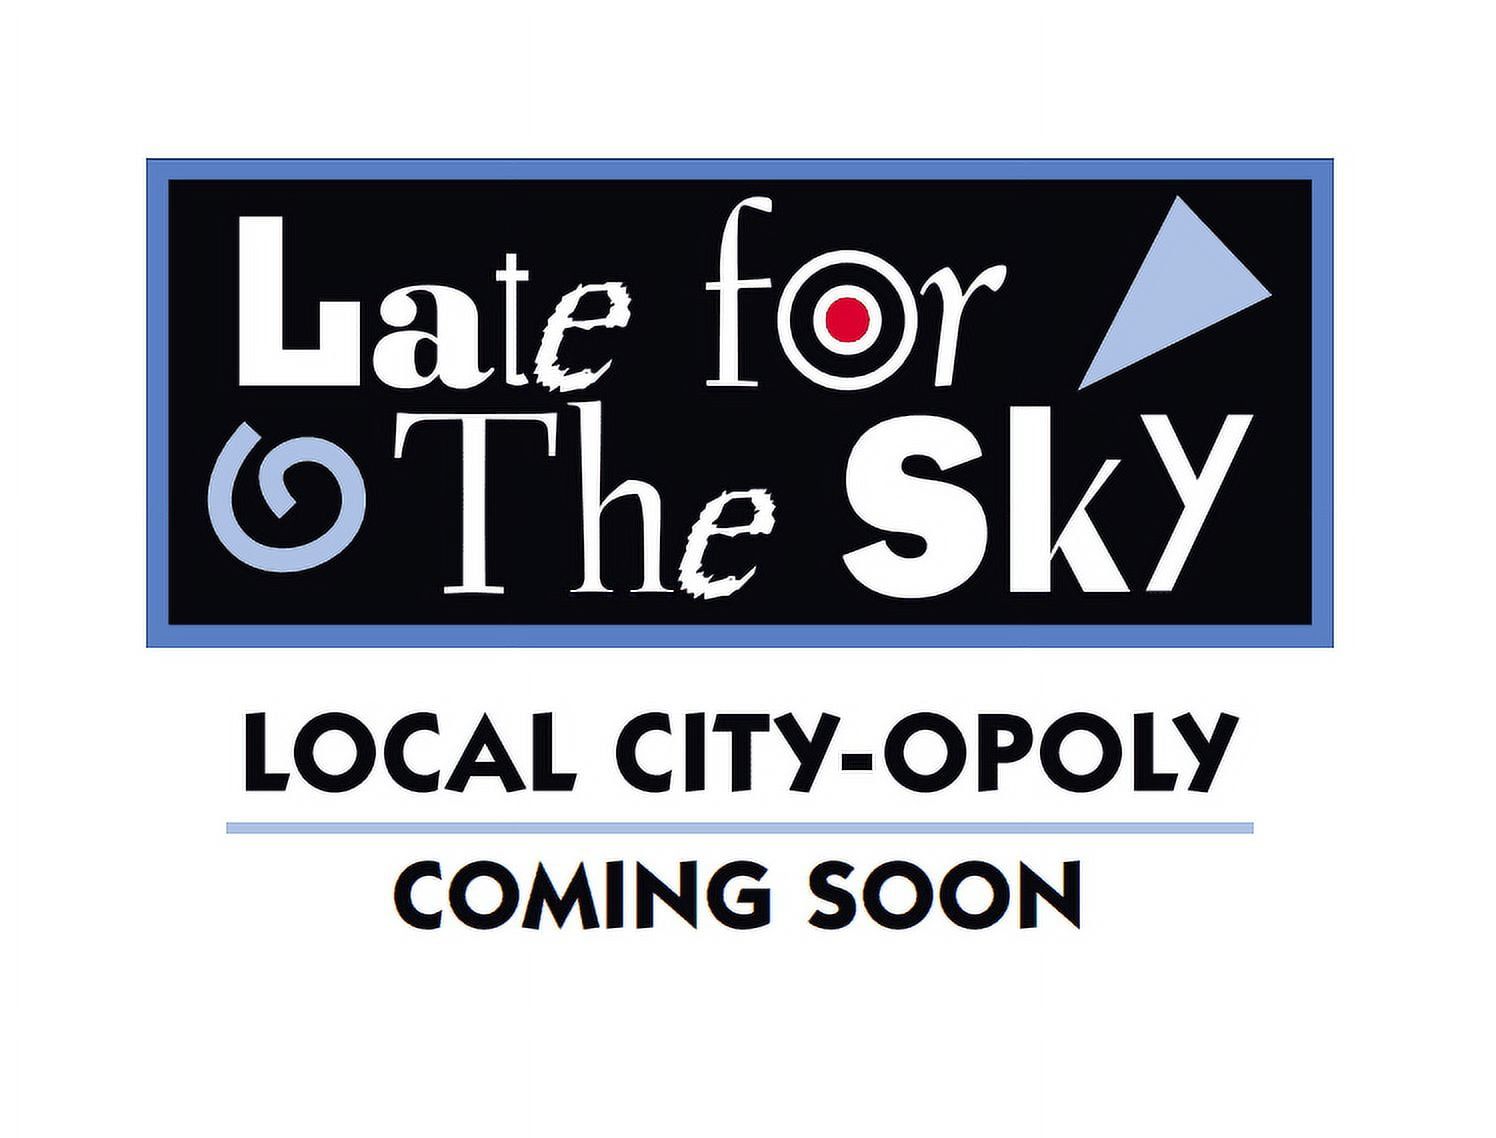 RDY 送料無料 Late for the Sky ディノ オポリ 楽天海外通販 Late For the Sky Dino-Opoly